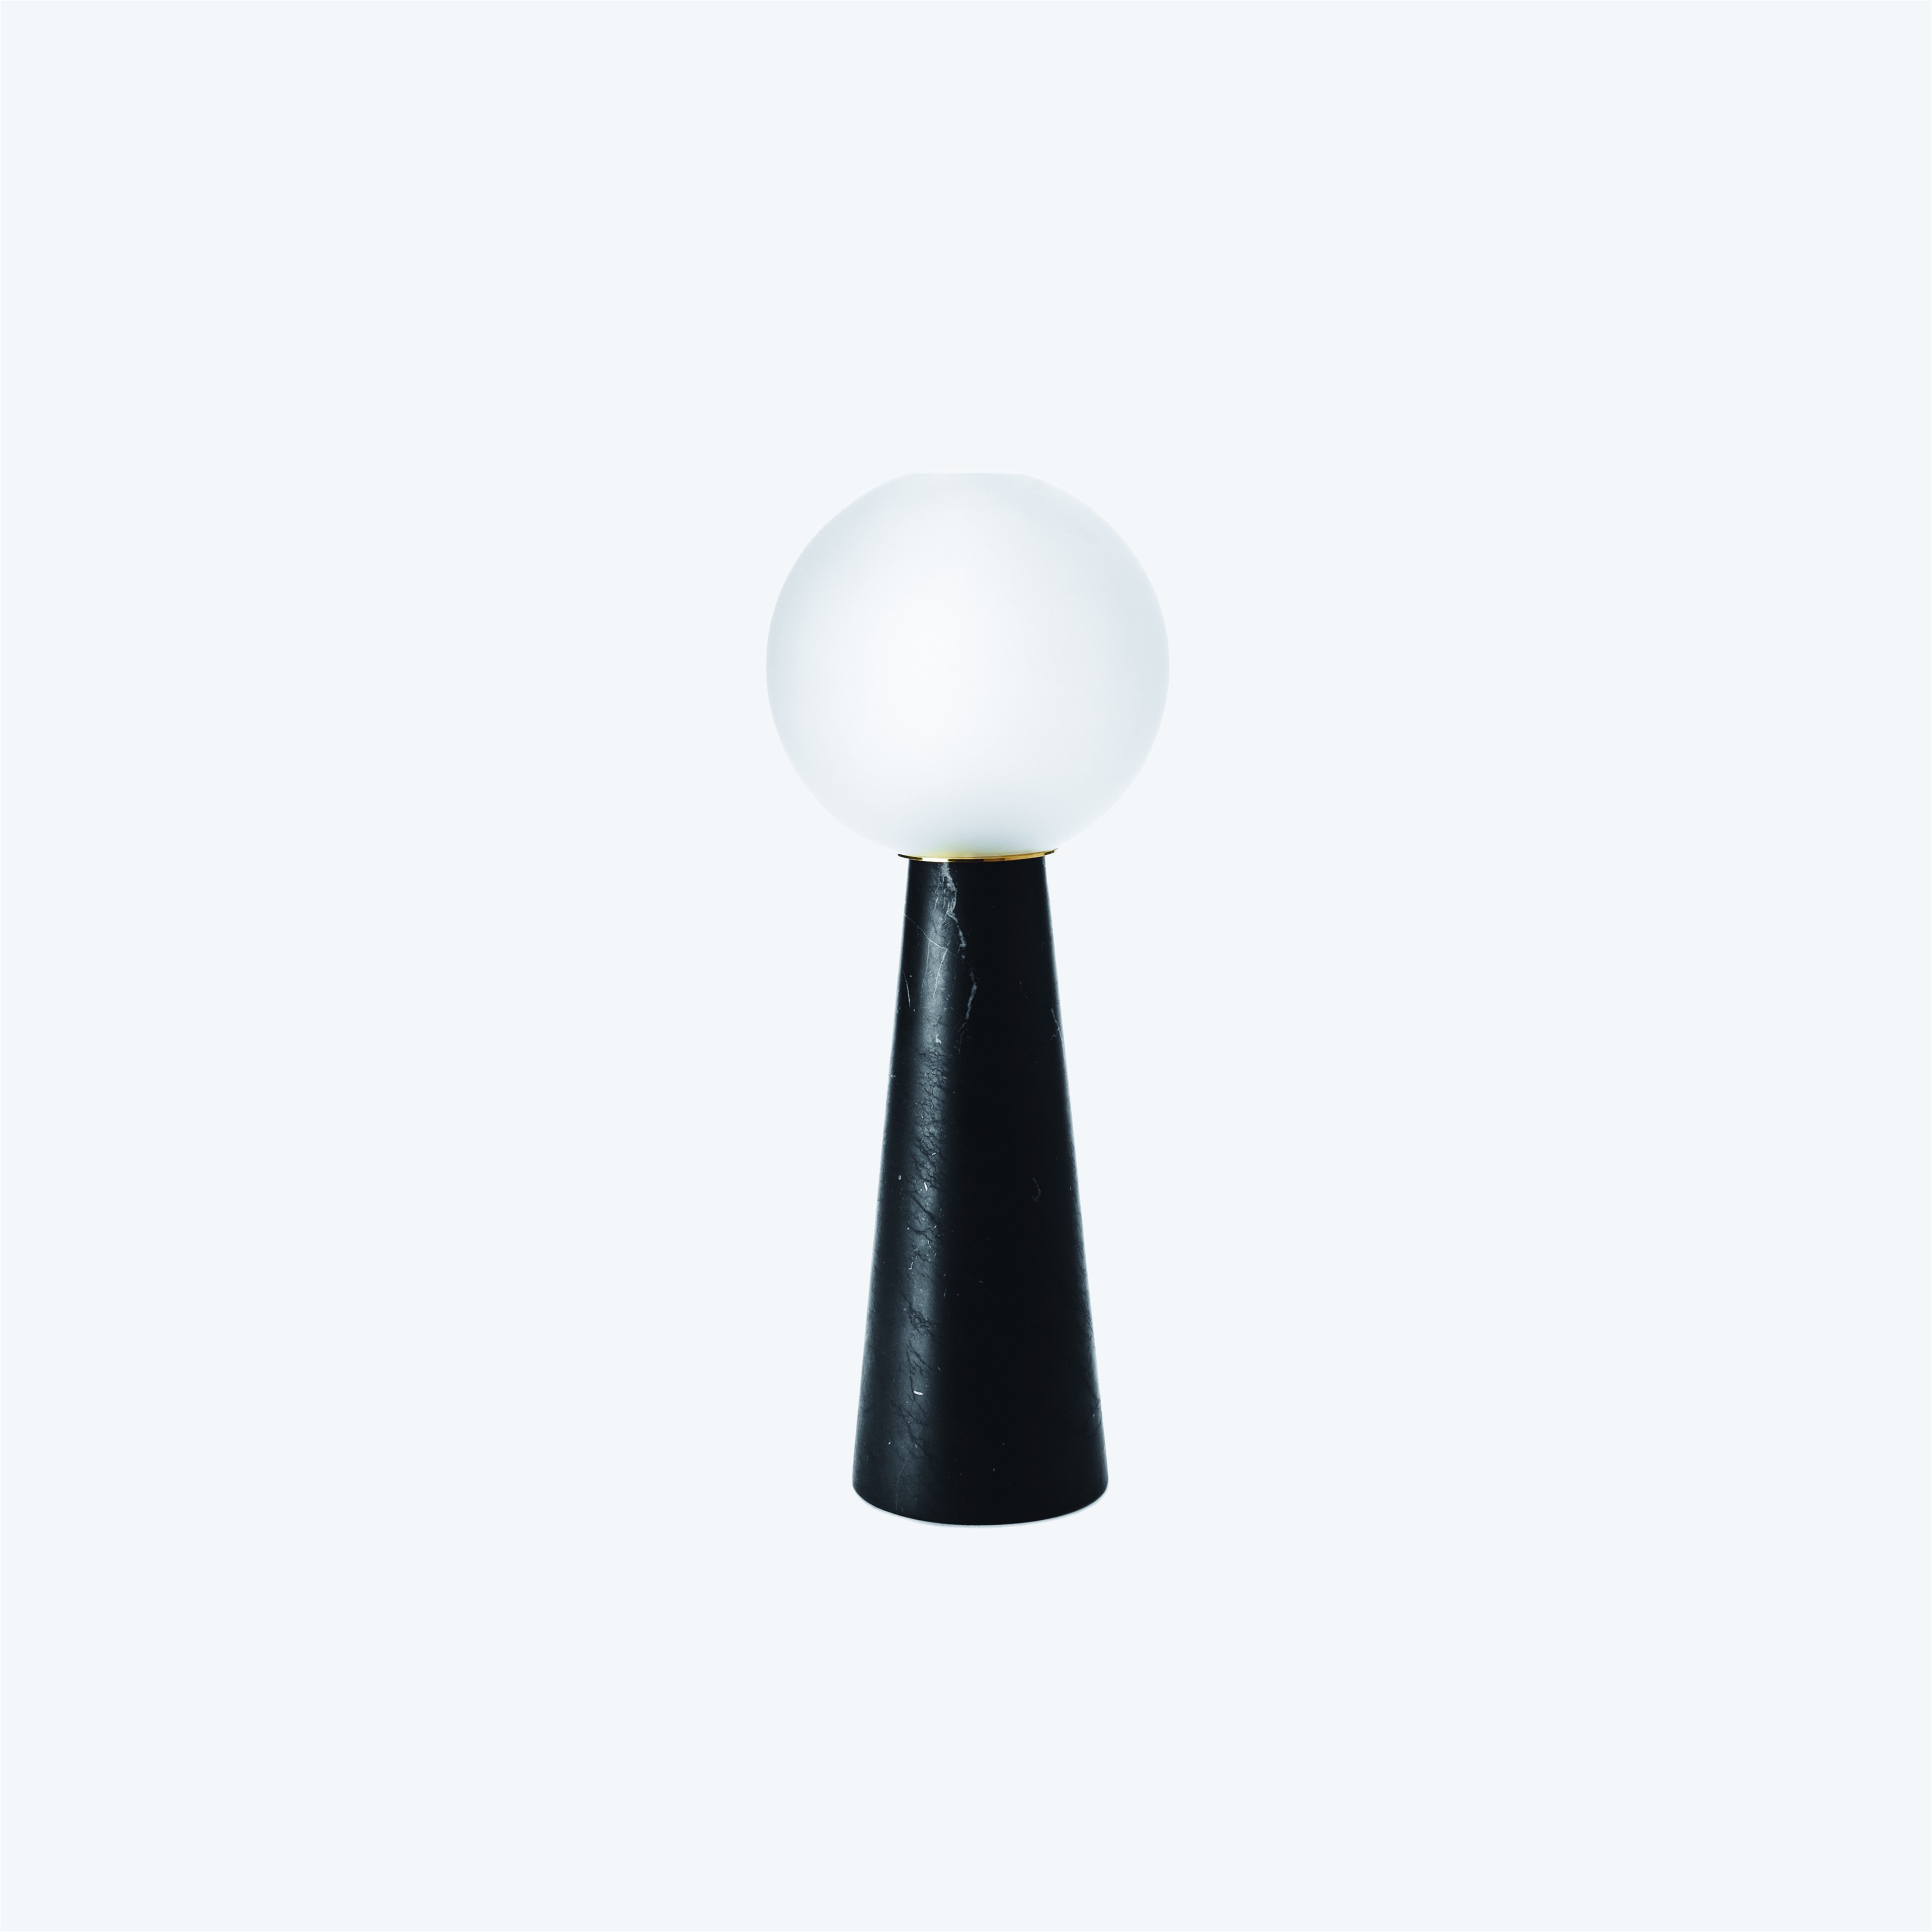 a white light sitting on top of a black stand